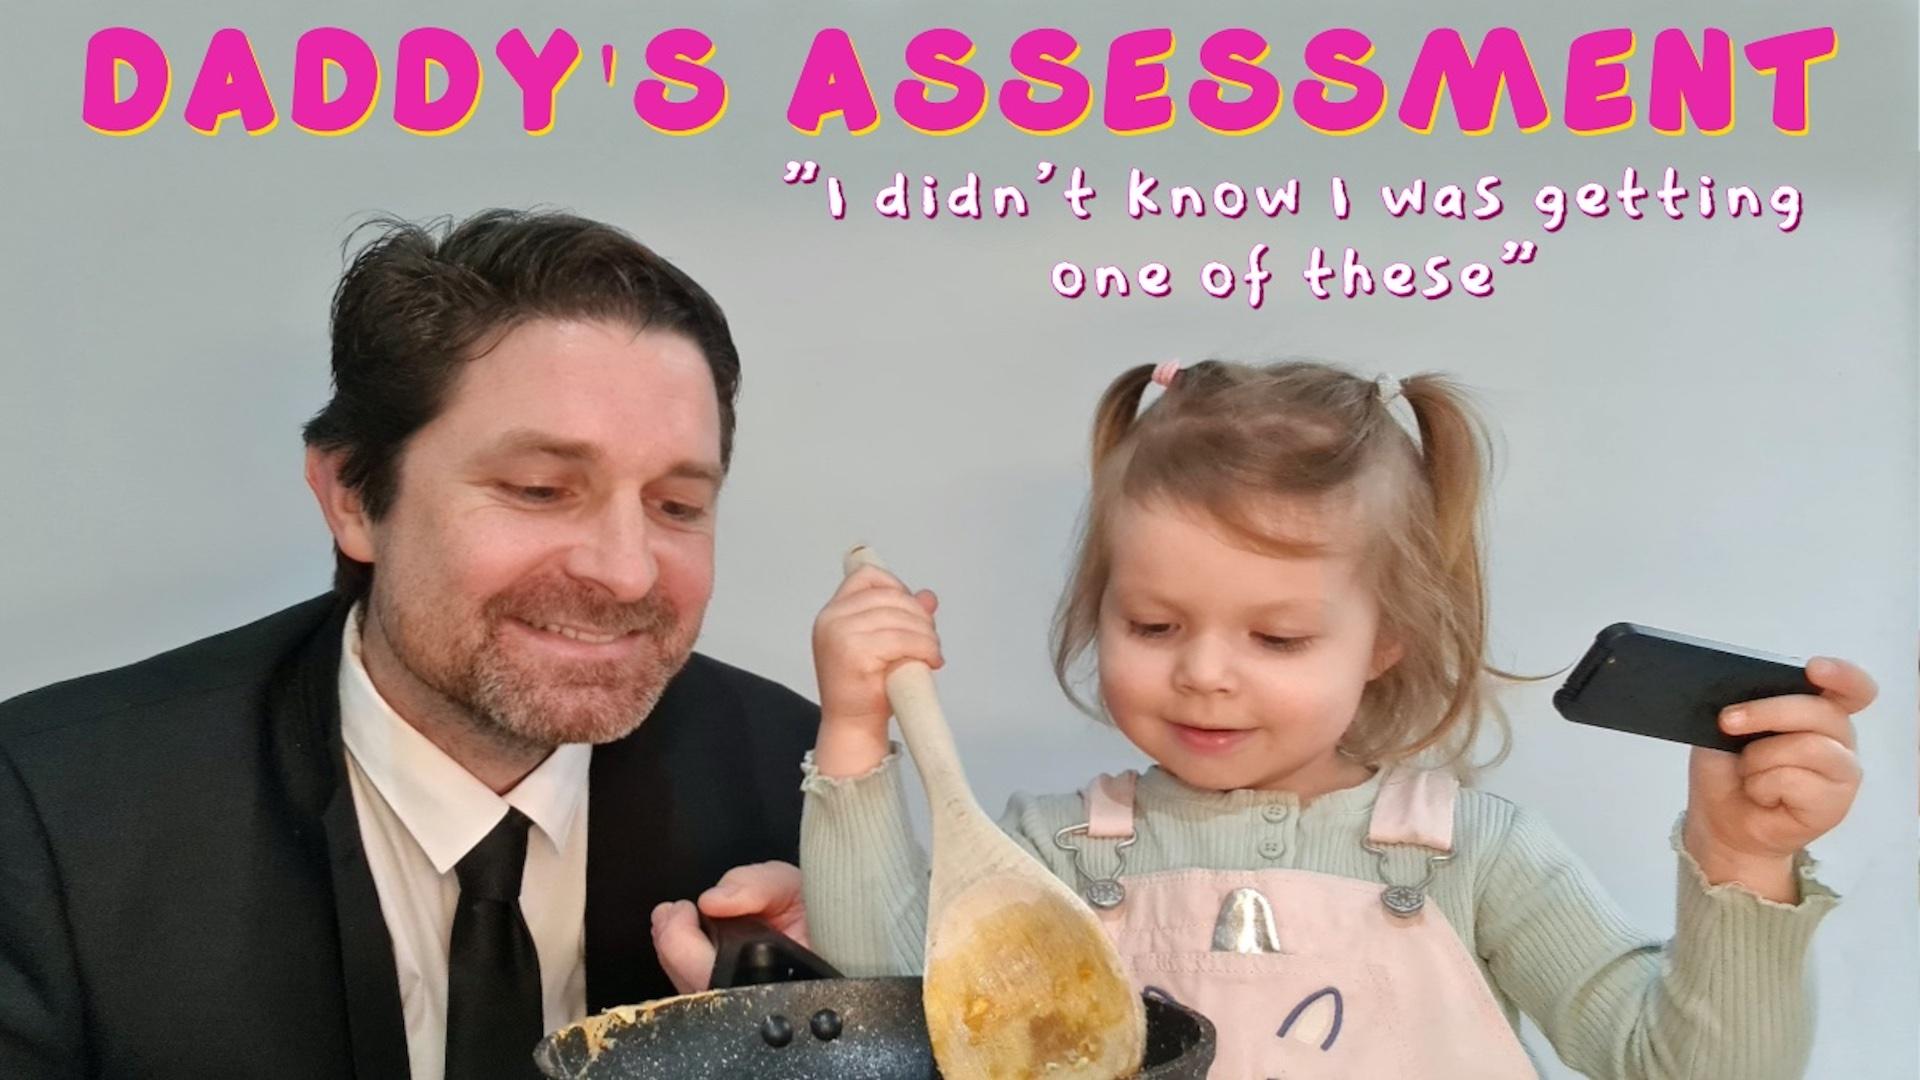 Daddy's Assessment